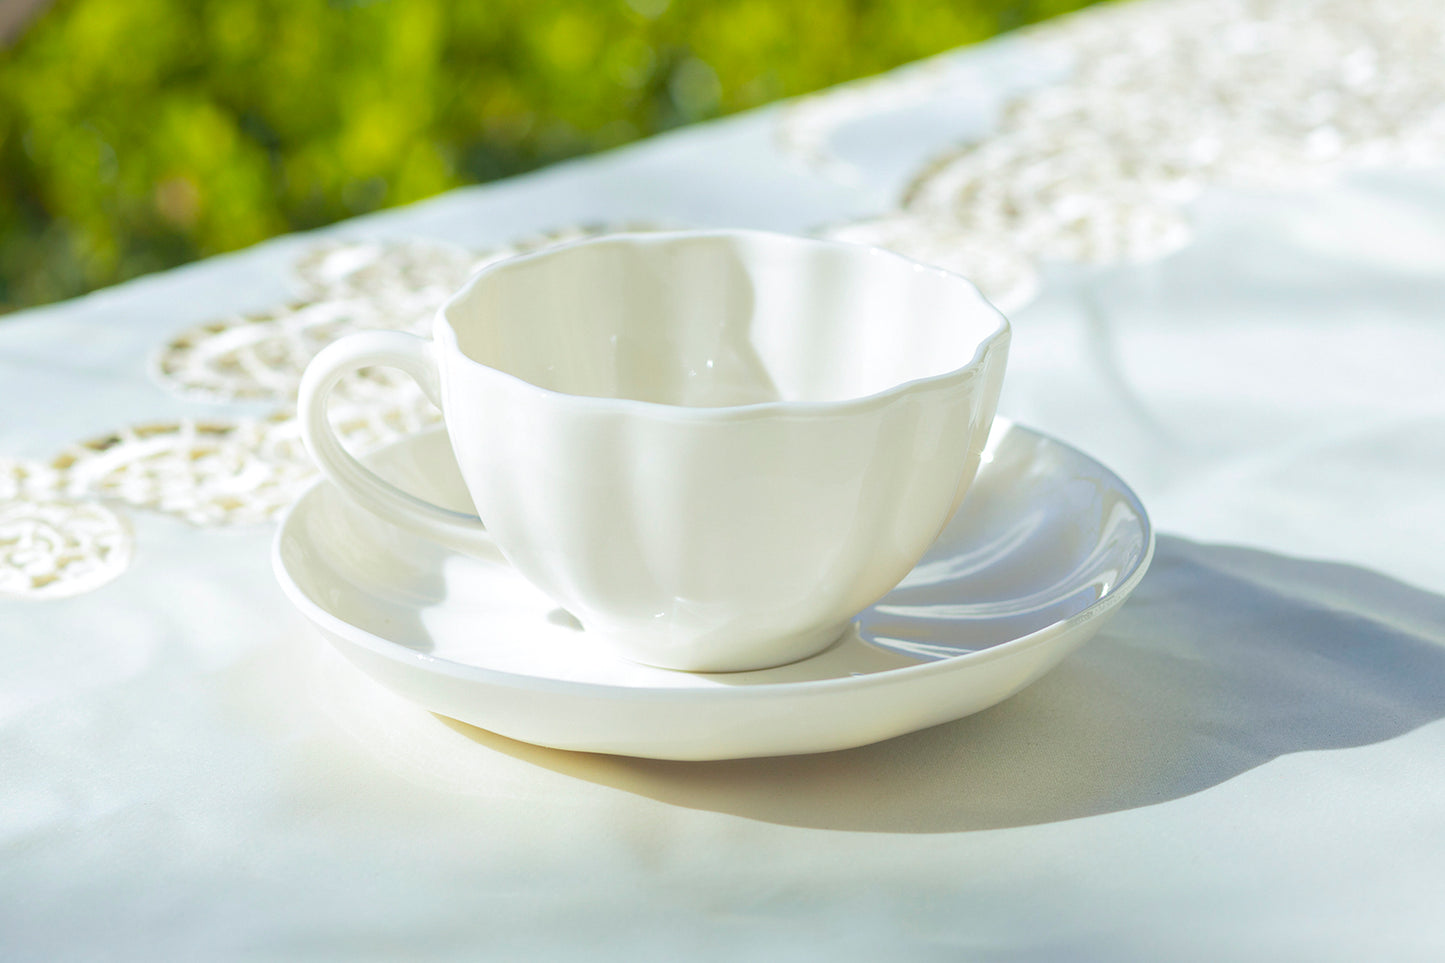 White Scallop Fine Porcelain Tea Cup and Saucer